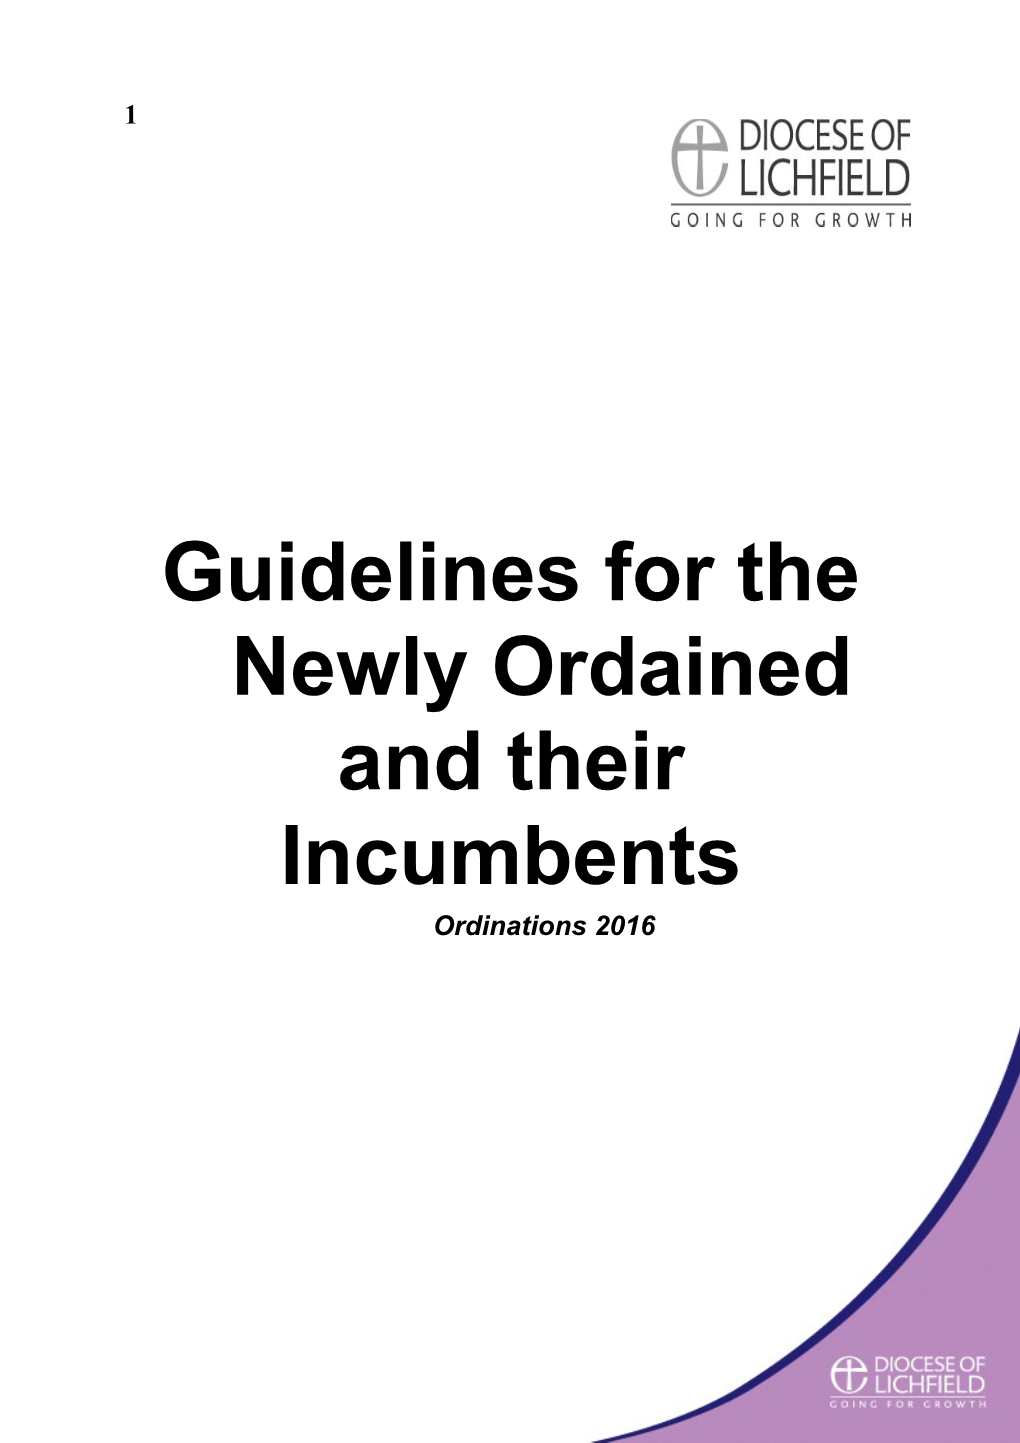 Guidelines for the Newly Ordained and Their